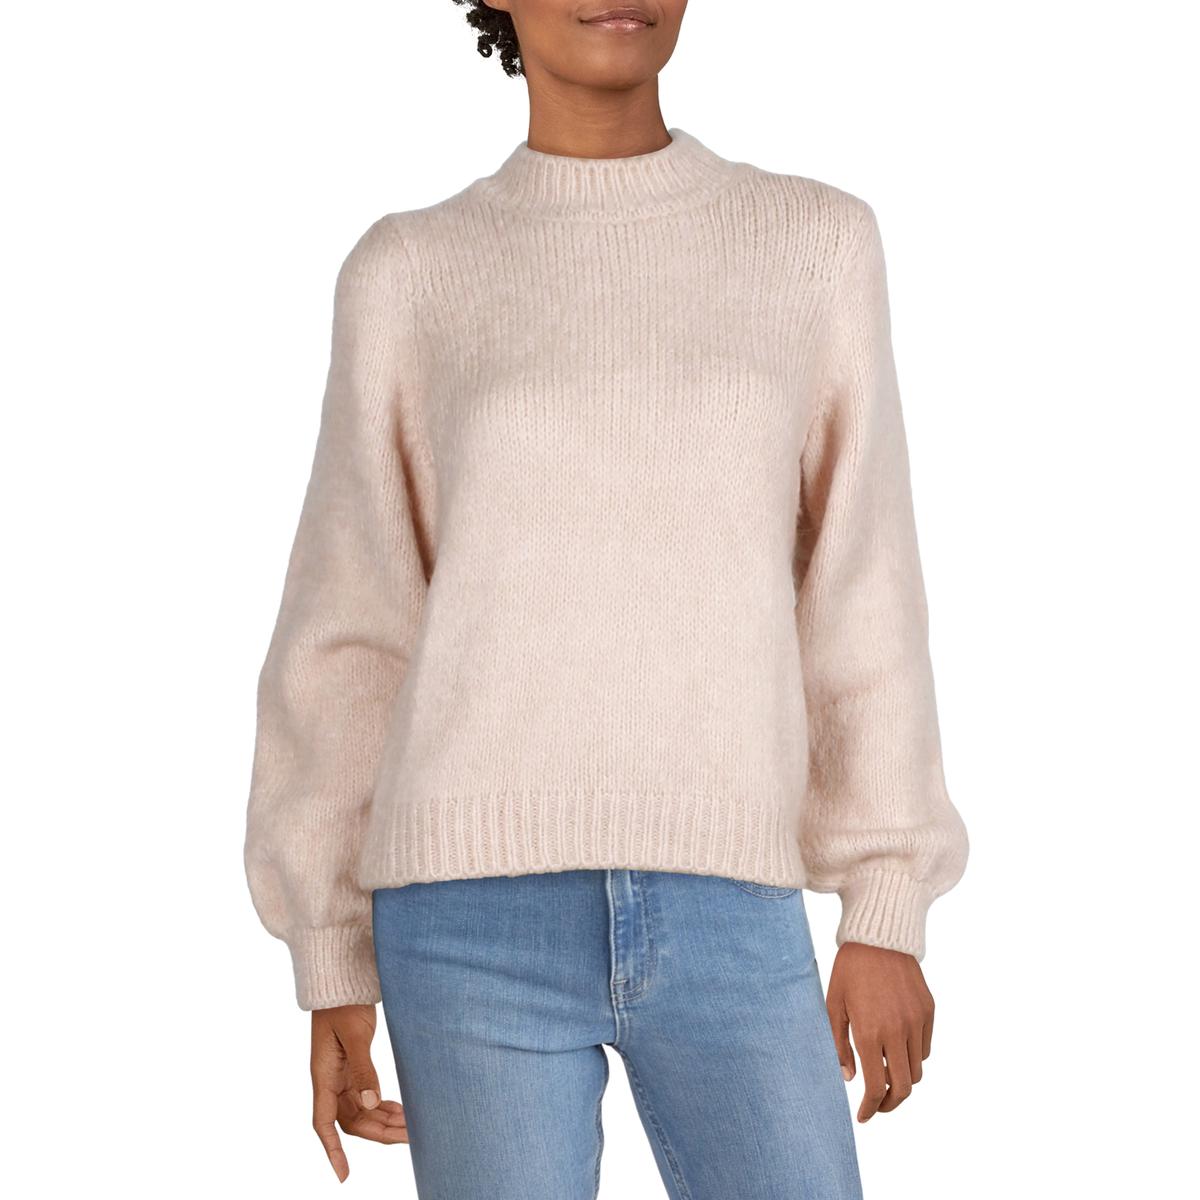 bombe skøjte forfængelighed Vero Moda Women's Knit High Neck Pullover Sweater with Slouch Sleeves | eBay